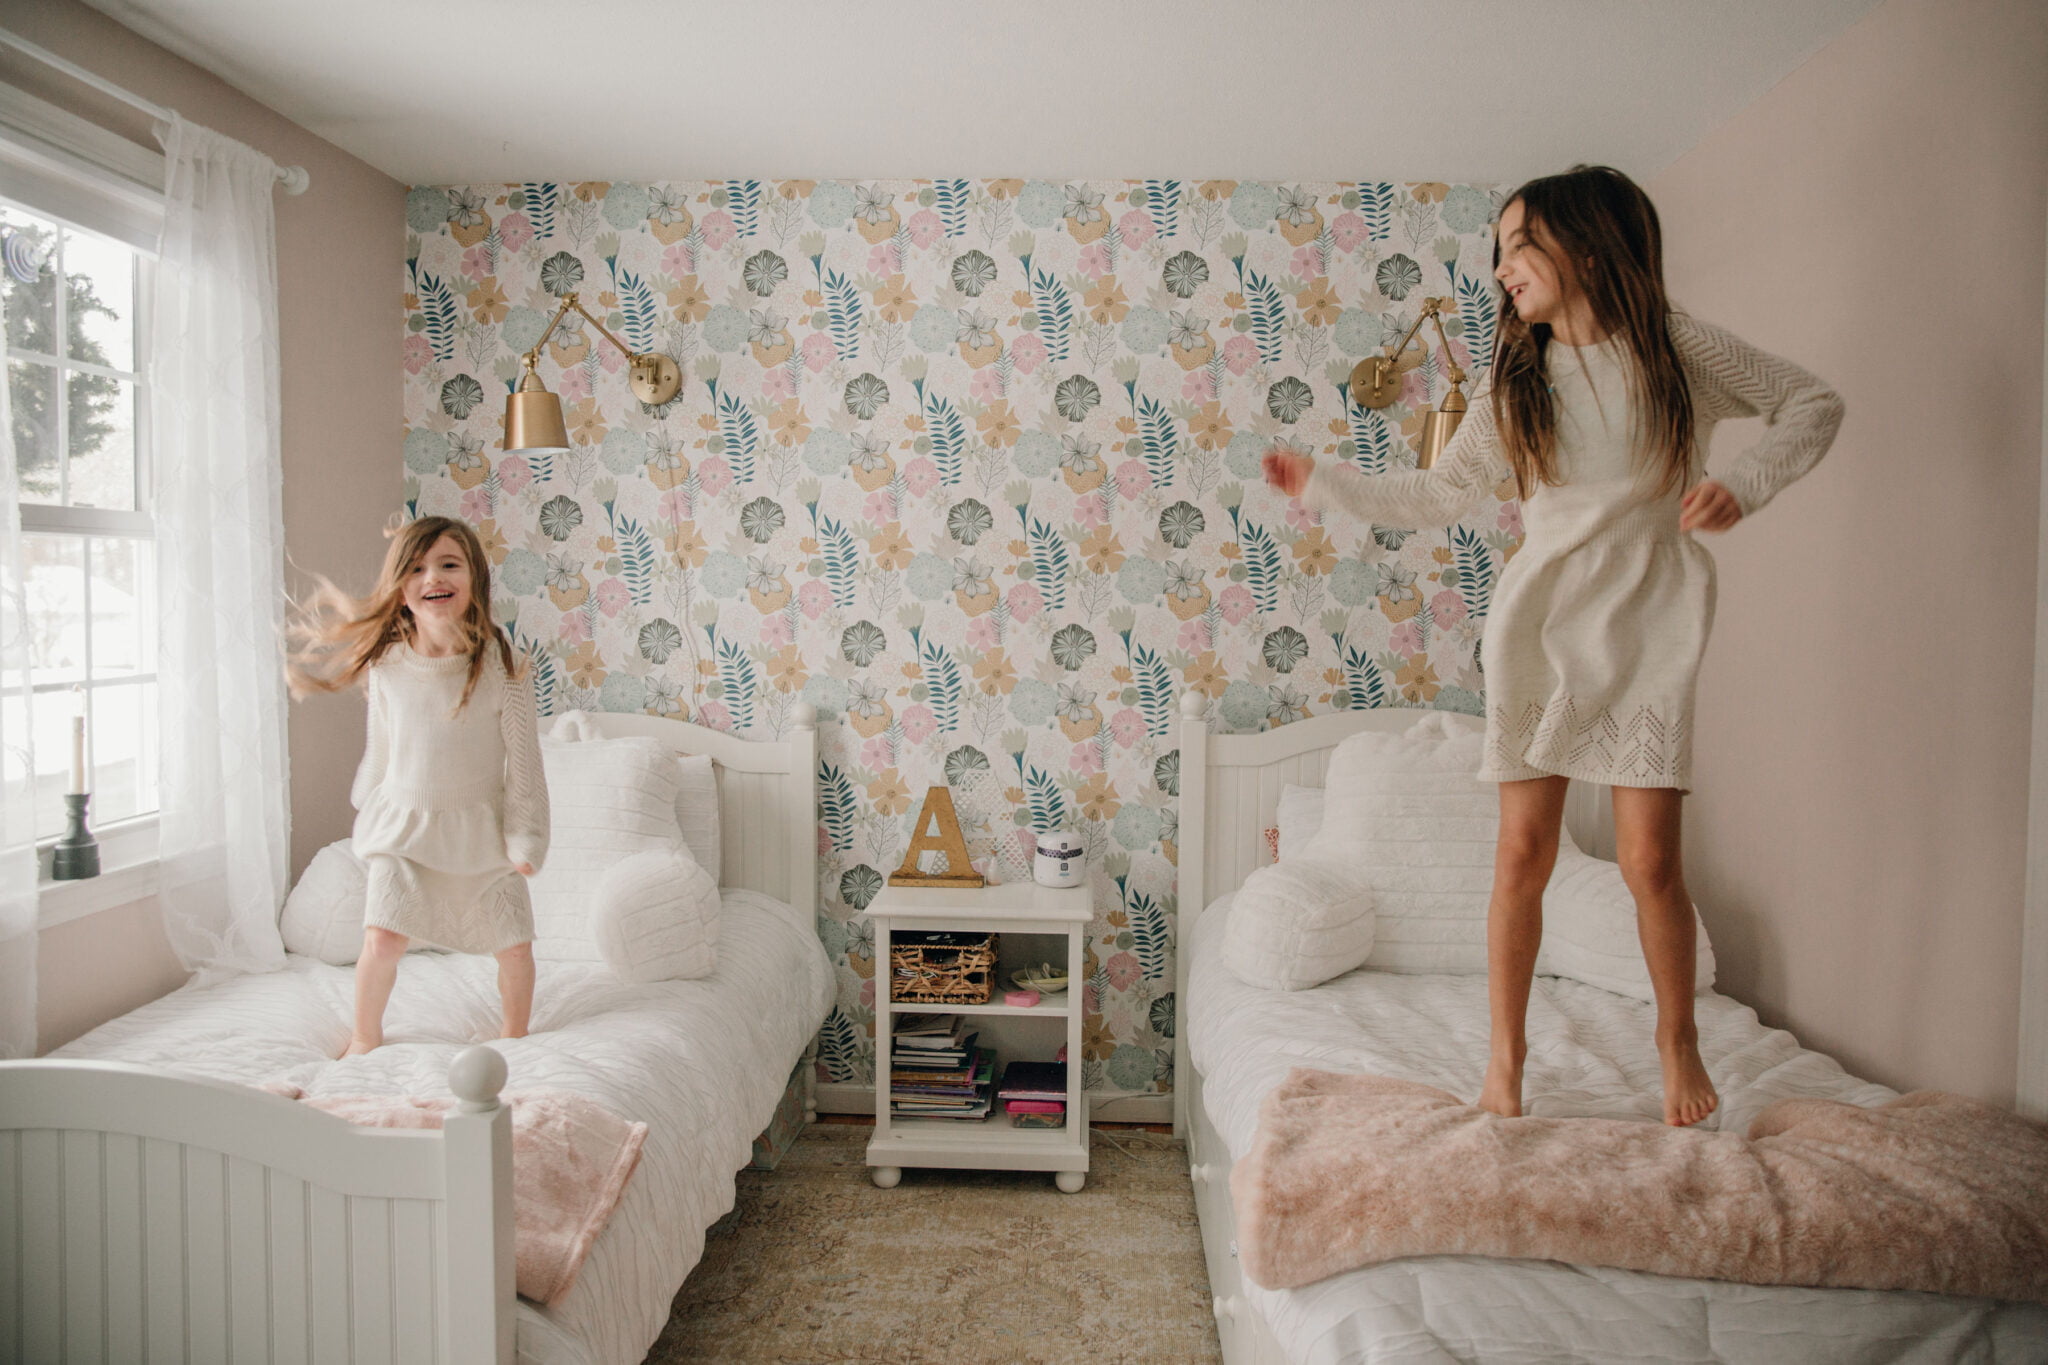 15 Fun Indoor Activities During Covid Girls Jumping on Bed